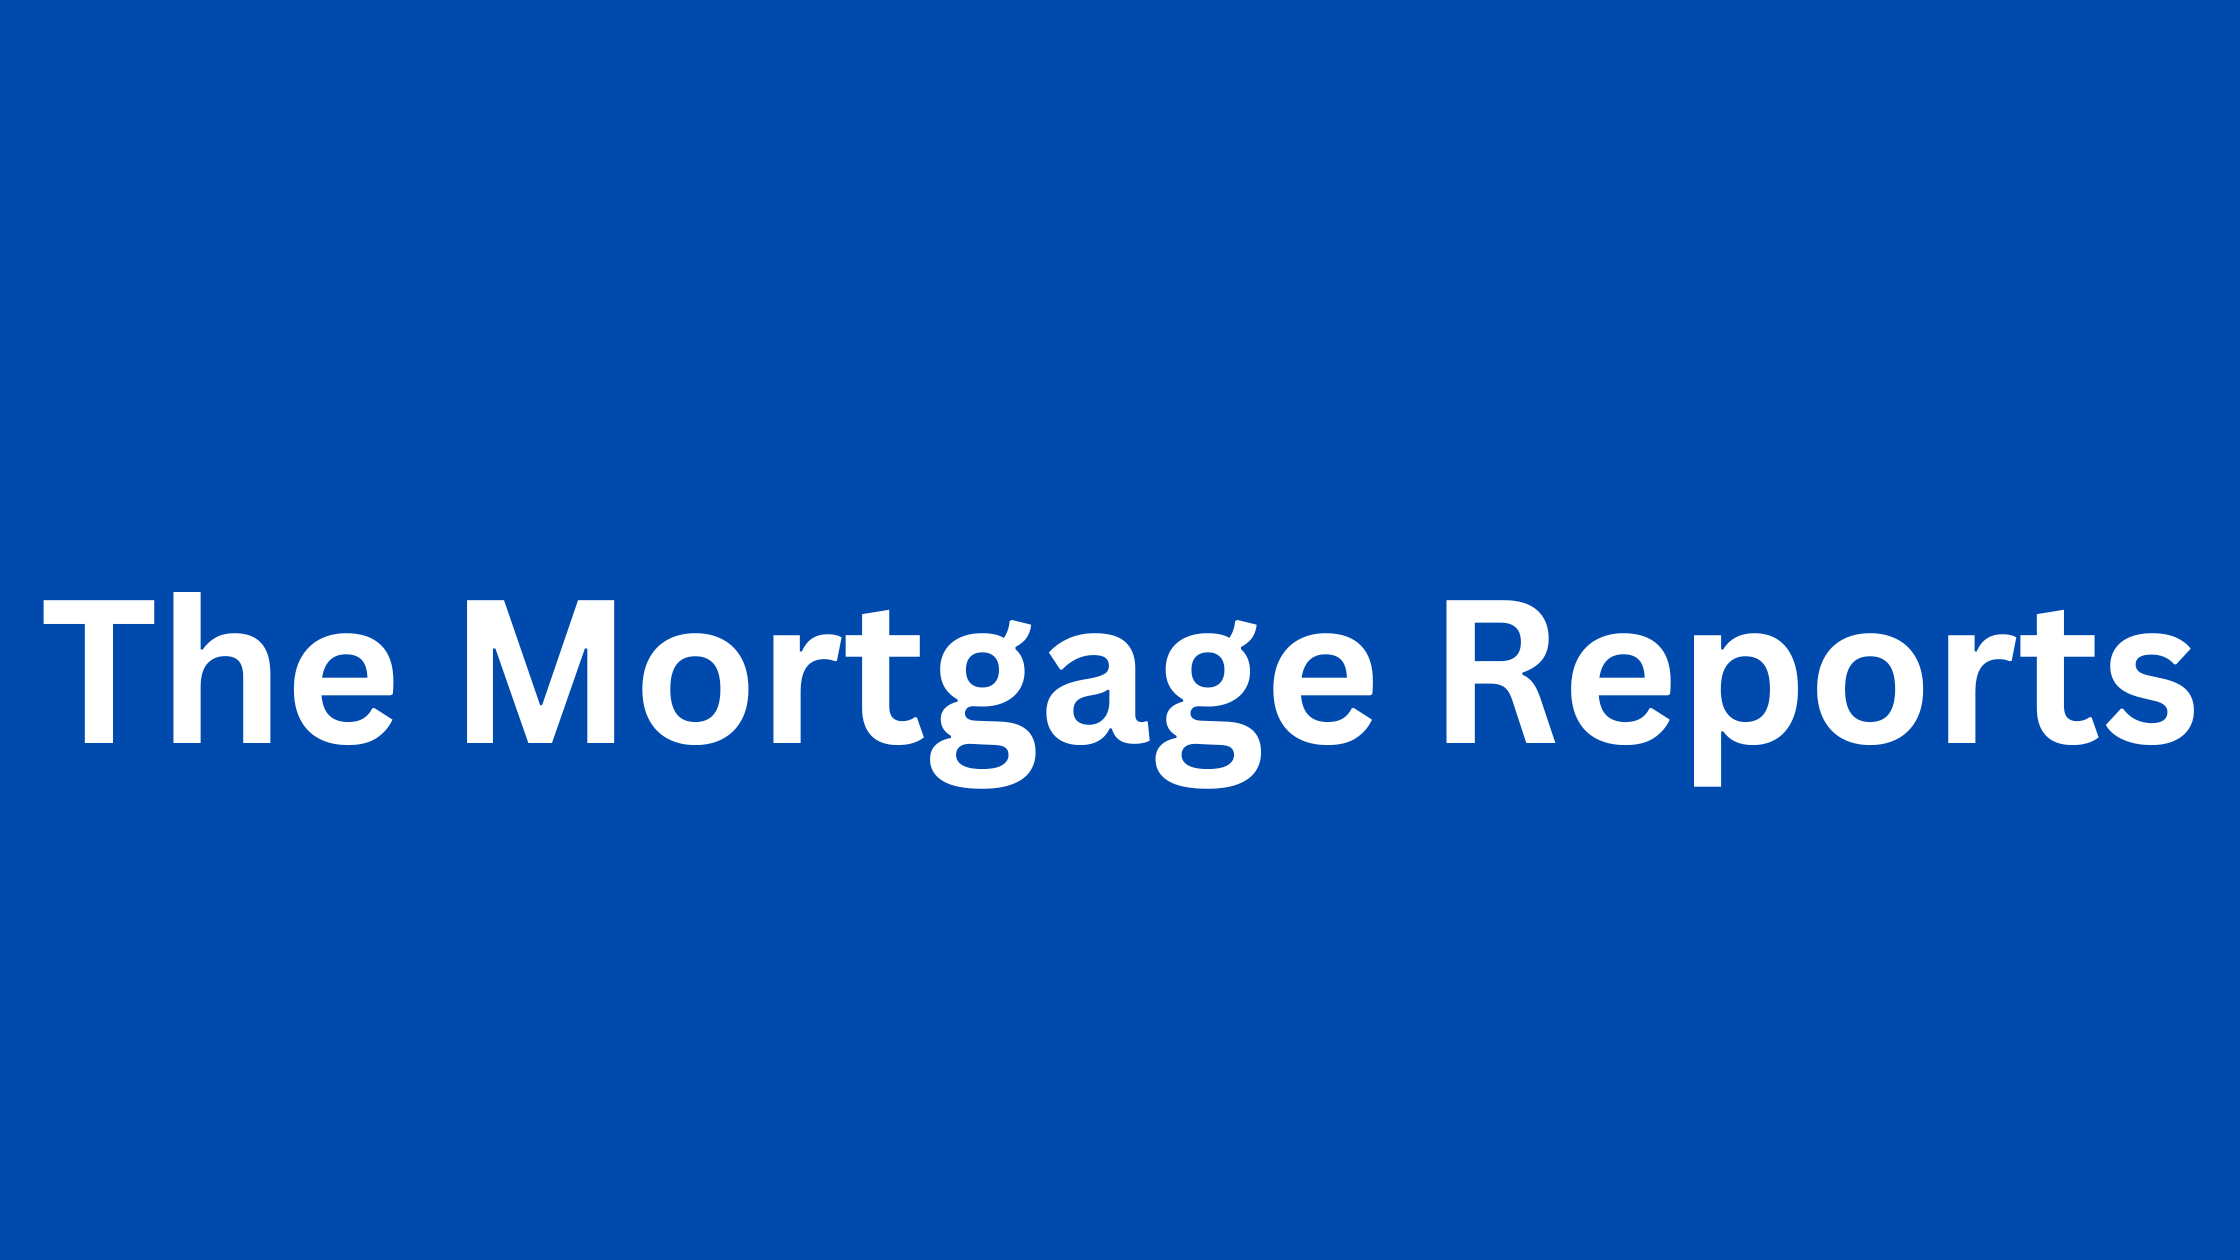 How to refinance your mortgage: Step-by-step guide for 2022